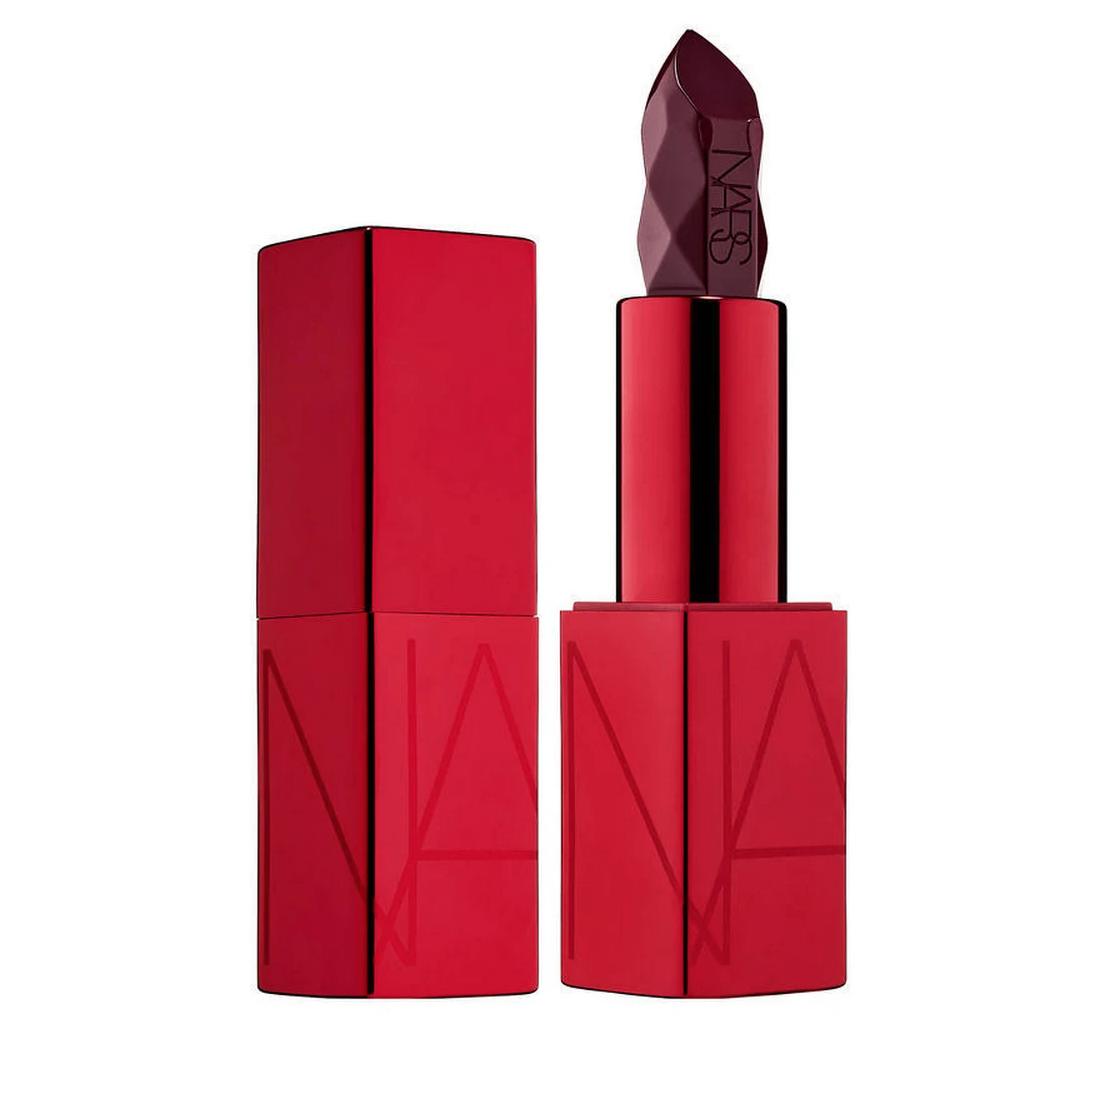 NARS Spiked Audacious Lipstick Siouxsie